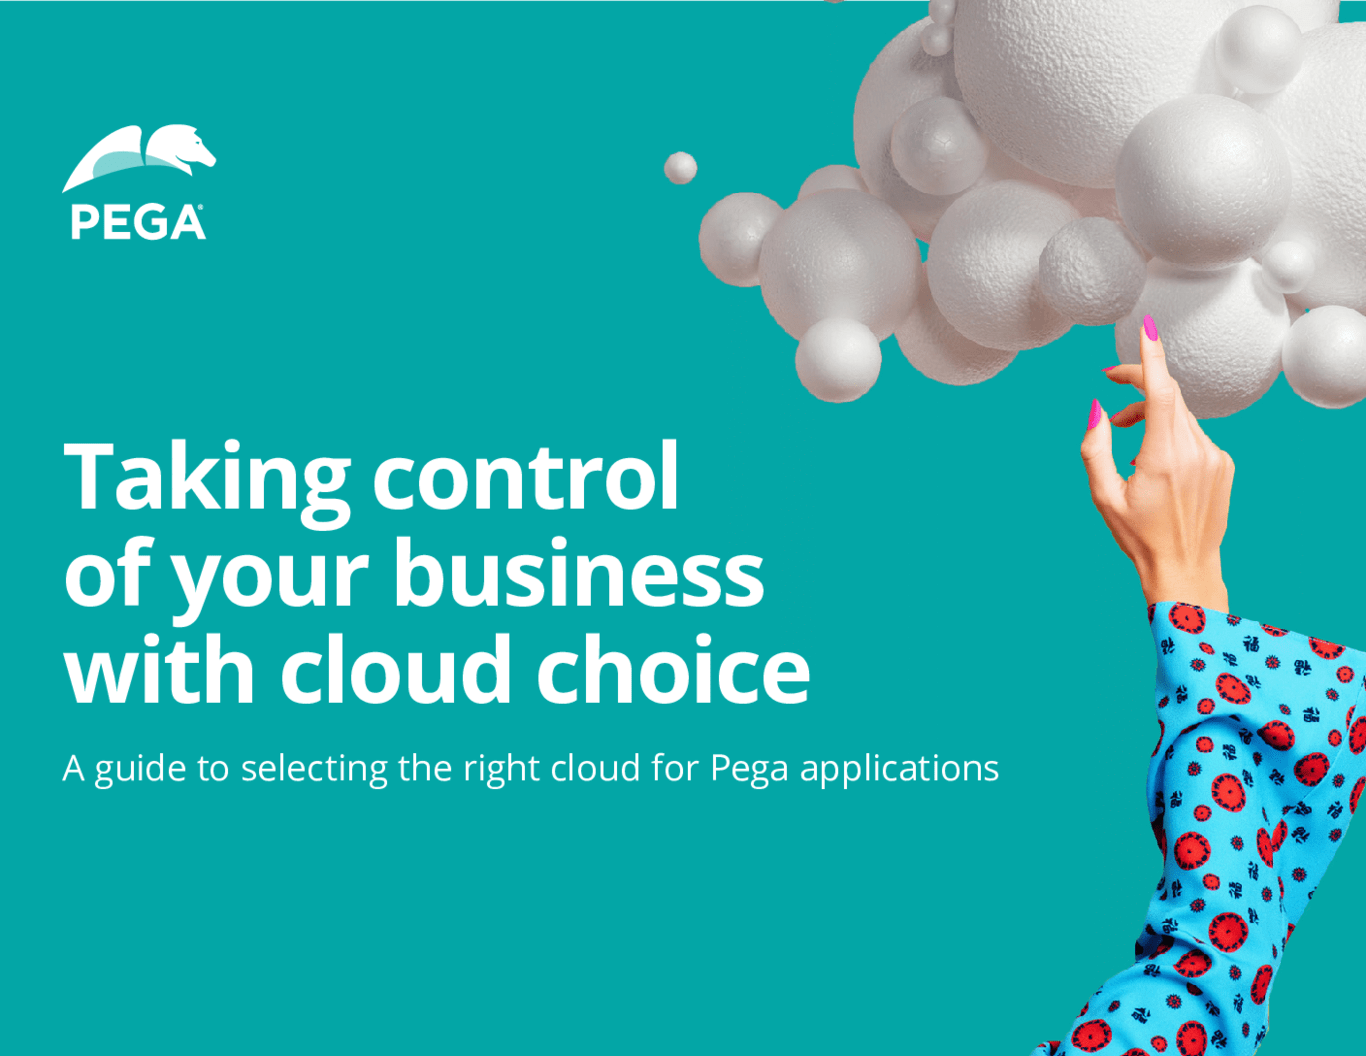 Cloud Choice Matters: A Guide to Selecting the Right Cloud